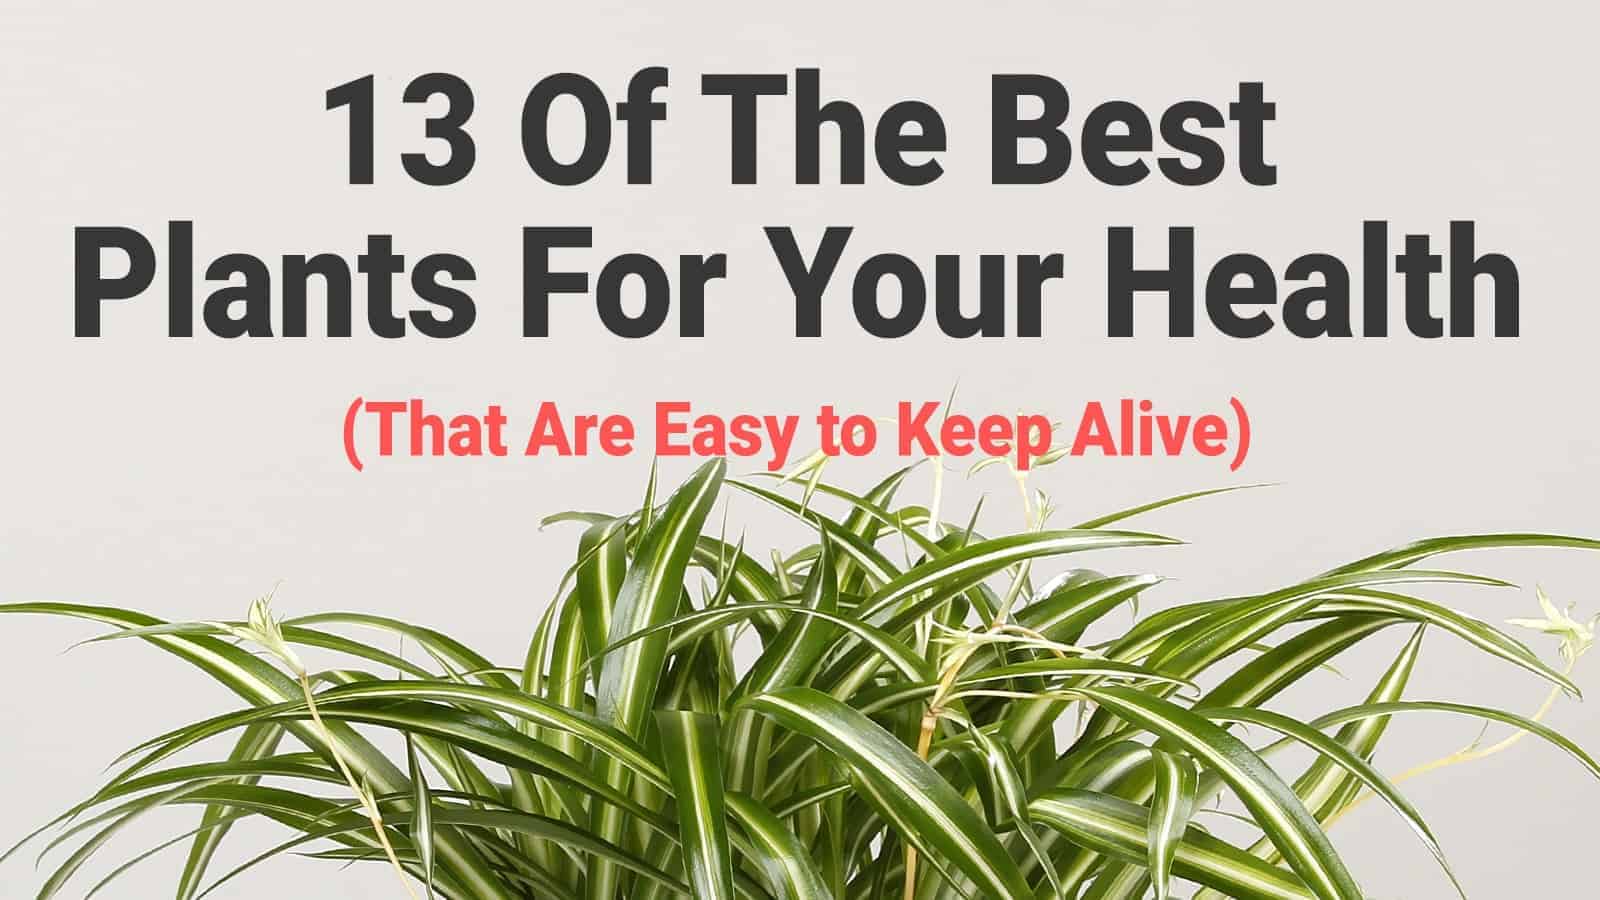 13 Of The Best Plants For Your Health (That Are Easy to Keep Alive)